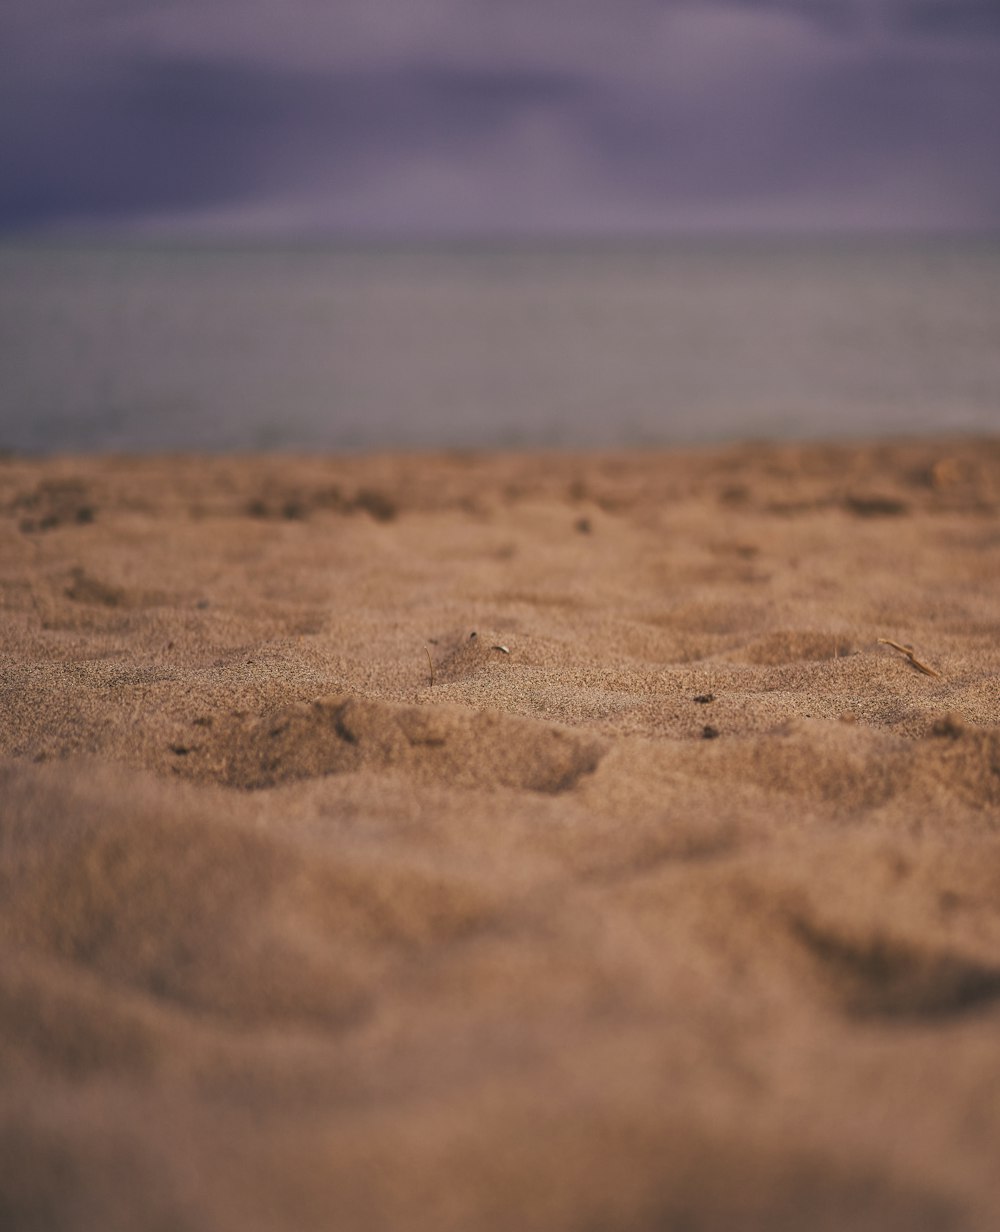 a close up of a sandy beach with a body of water in the background